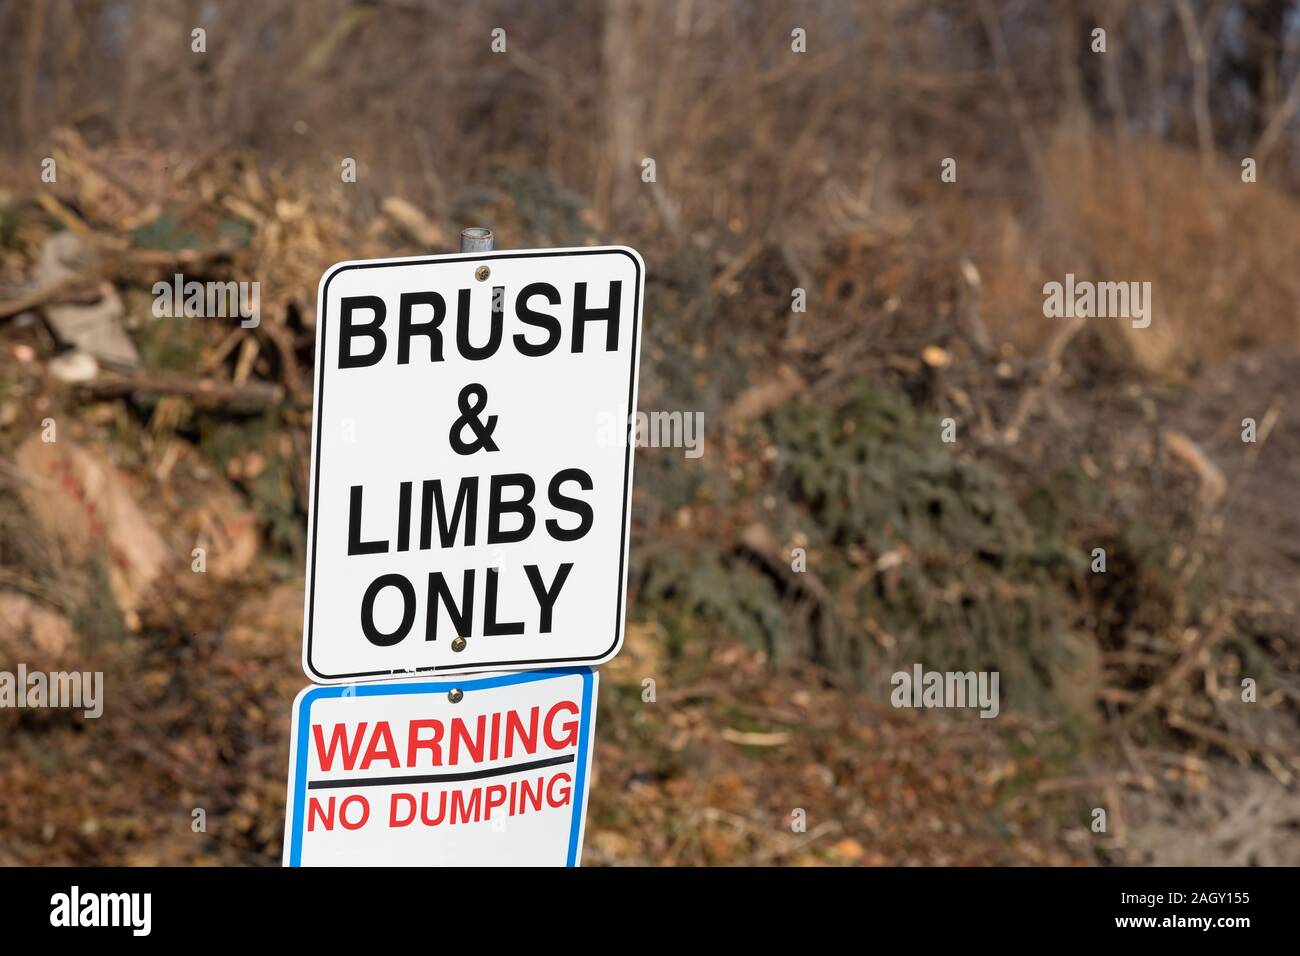 Brush and tree limbs only, no dumping sign at city yard waste disposal, dump site with pile of tree limbs, branches, and leaf bags in background Stock Photo